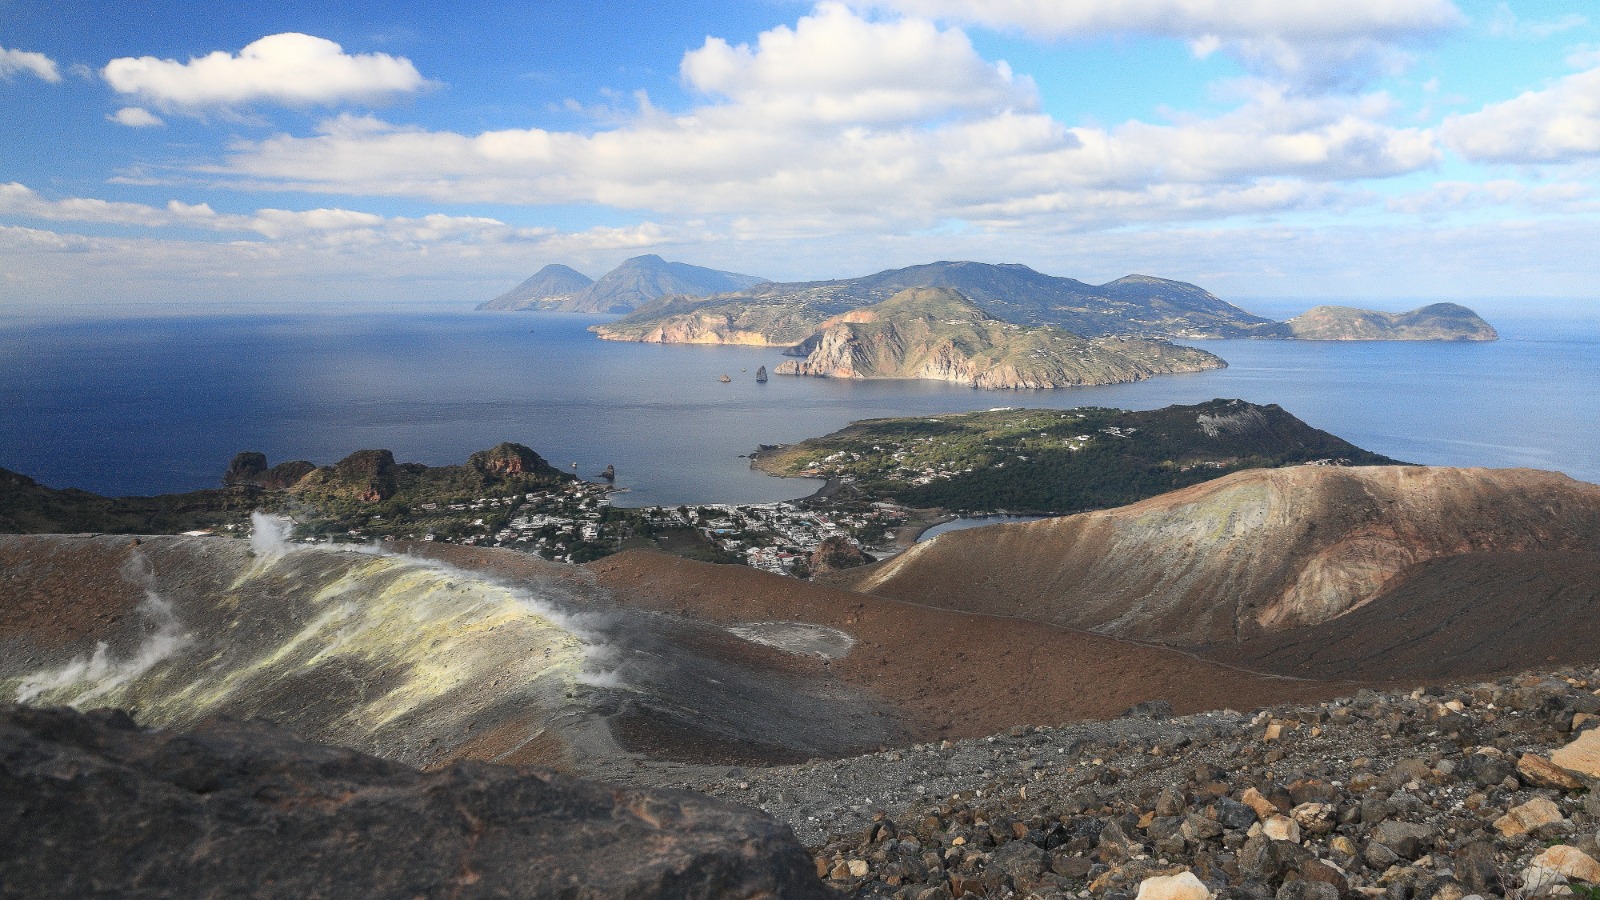 Una panoramica delle isole Eolie.jpg